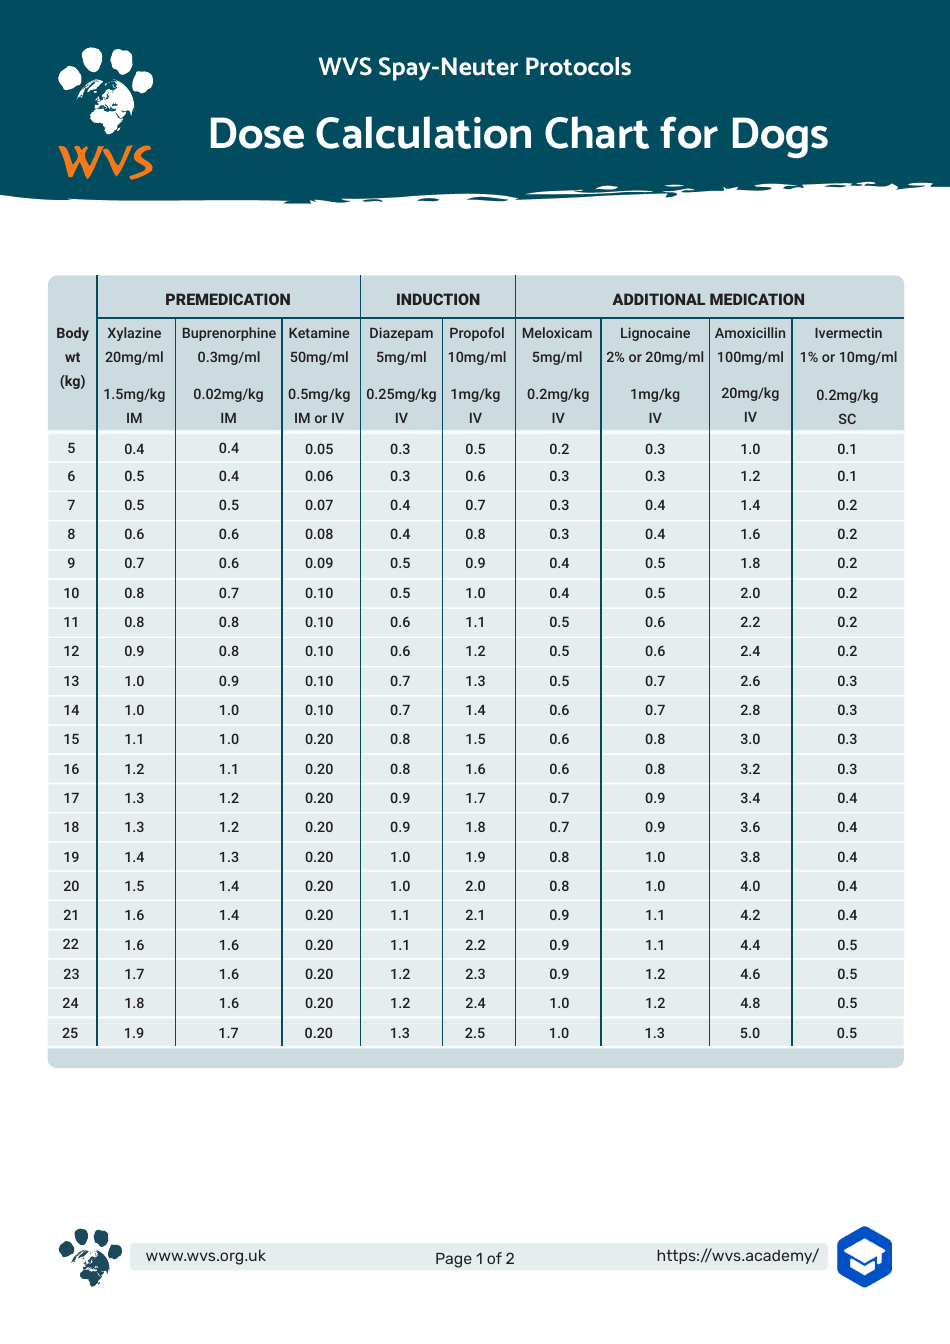 Dose Calculation Chart for Dogs, Page 1